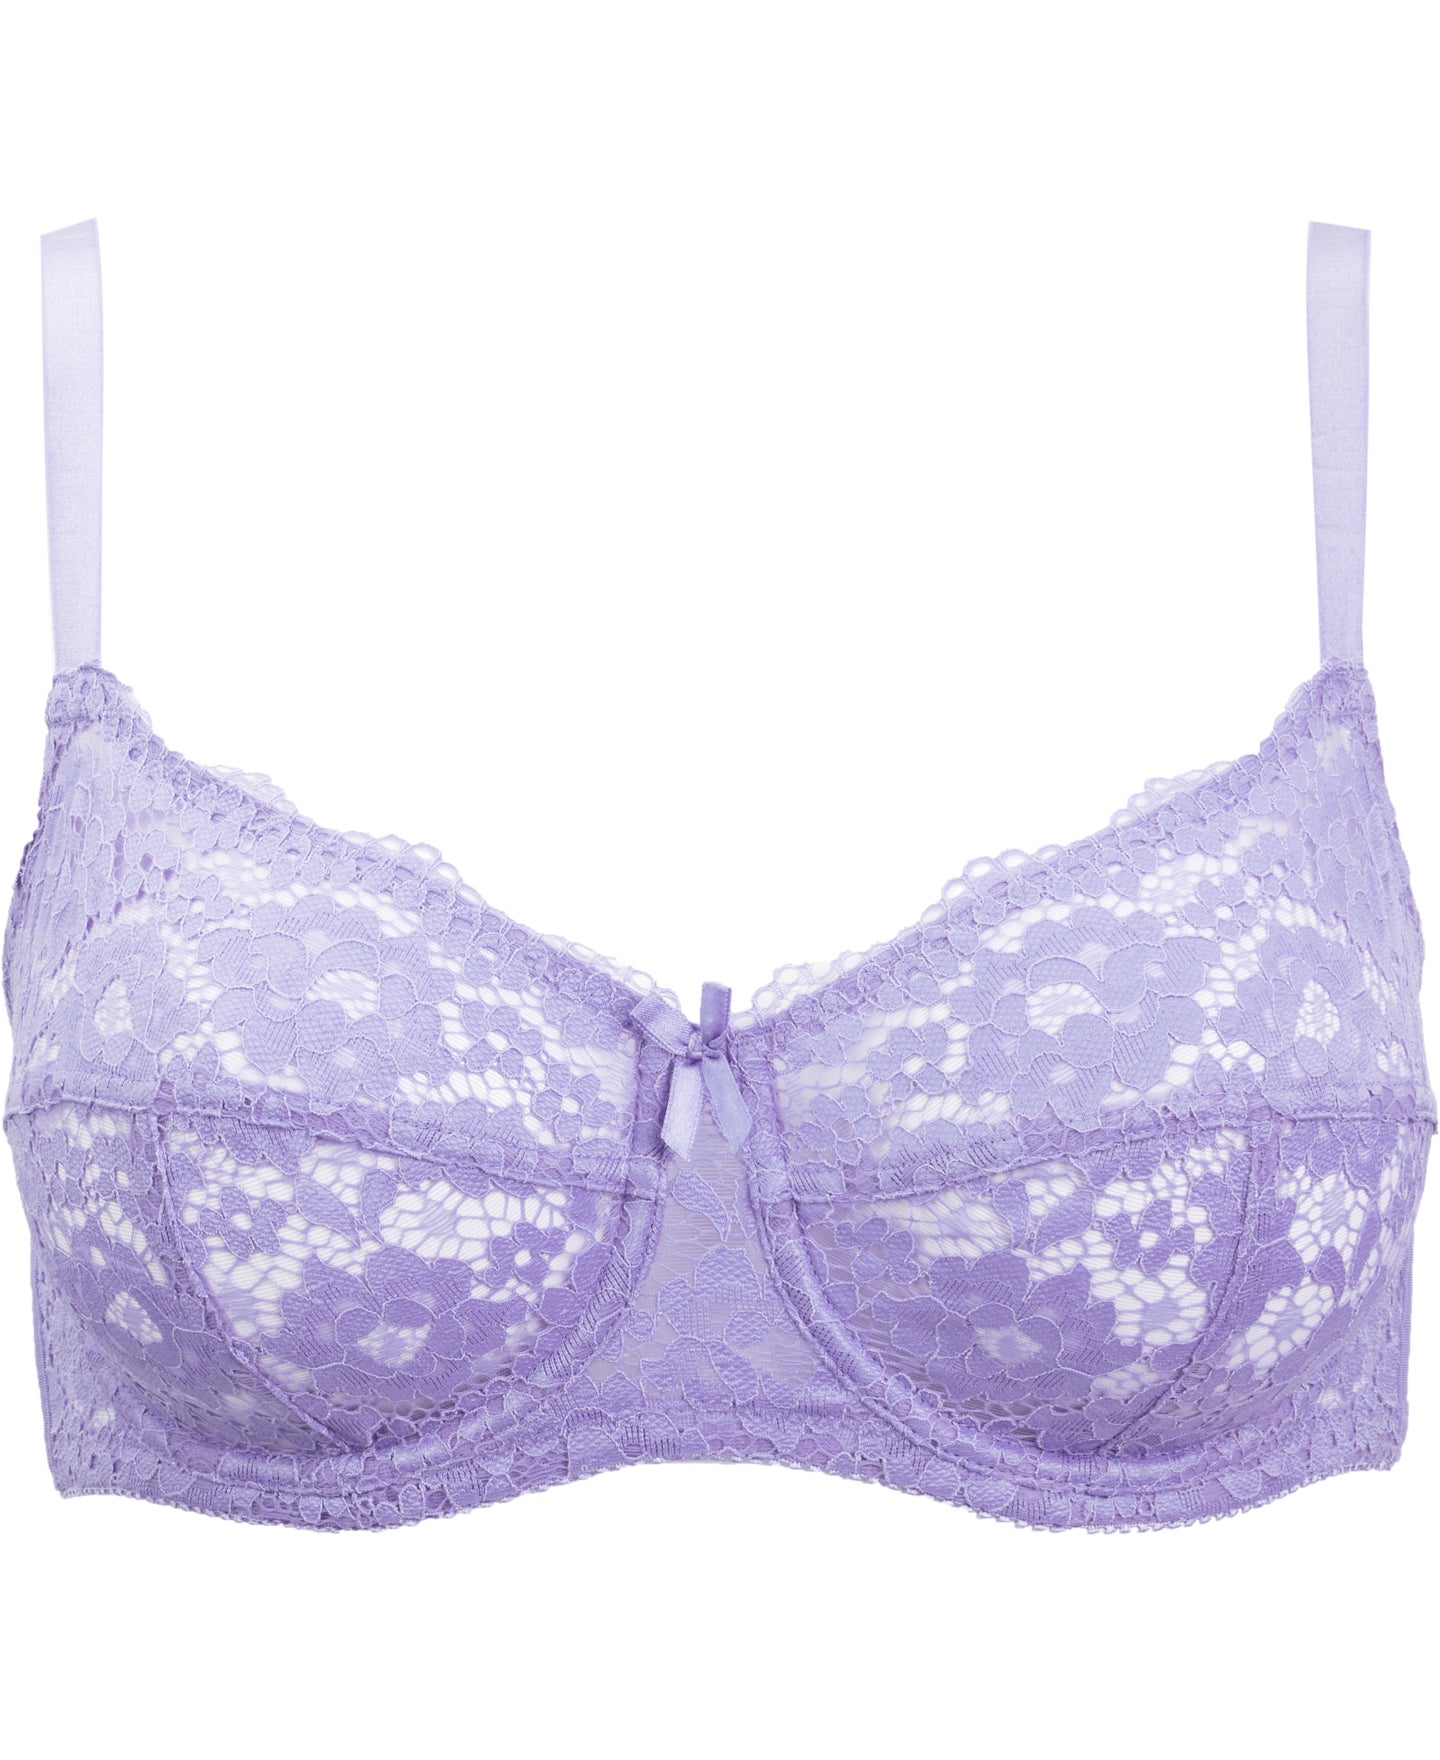 https://www.postie.co.nz/content/products/womens-full-figure-daisy-lace-underwire-bra-lilac-a-outfit-820274.jpg